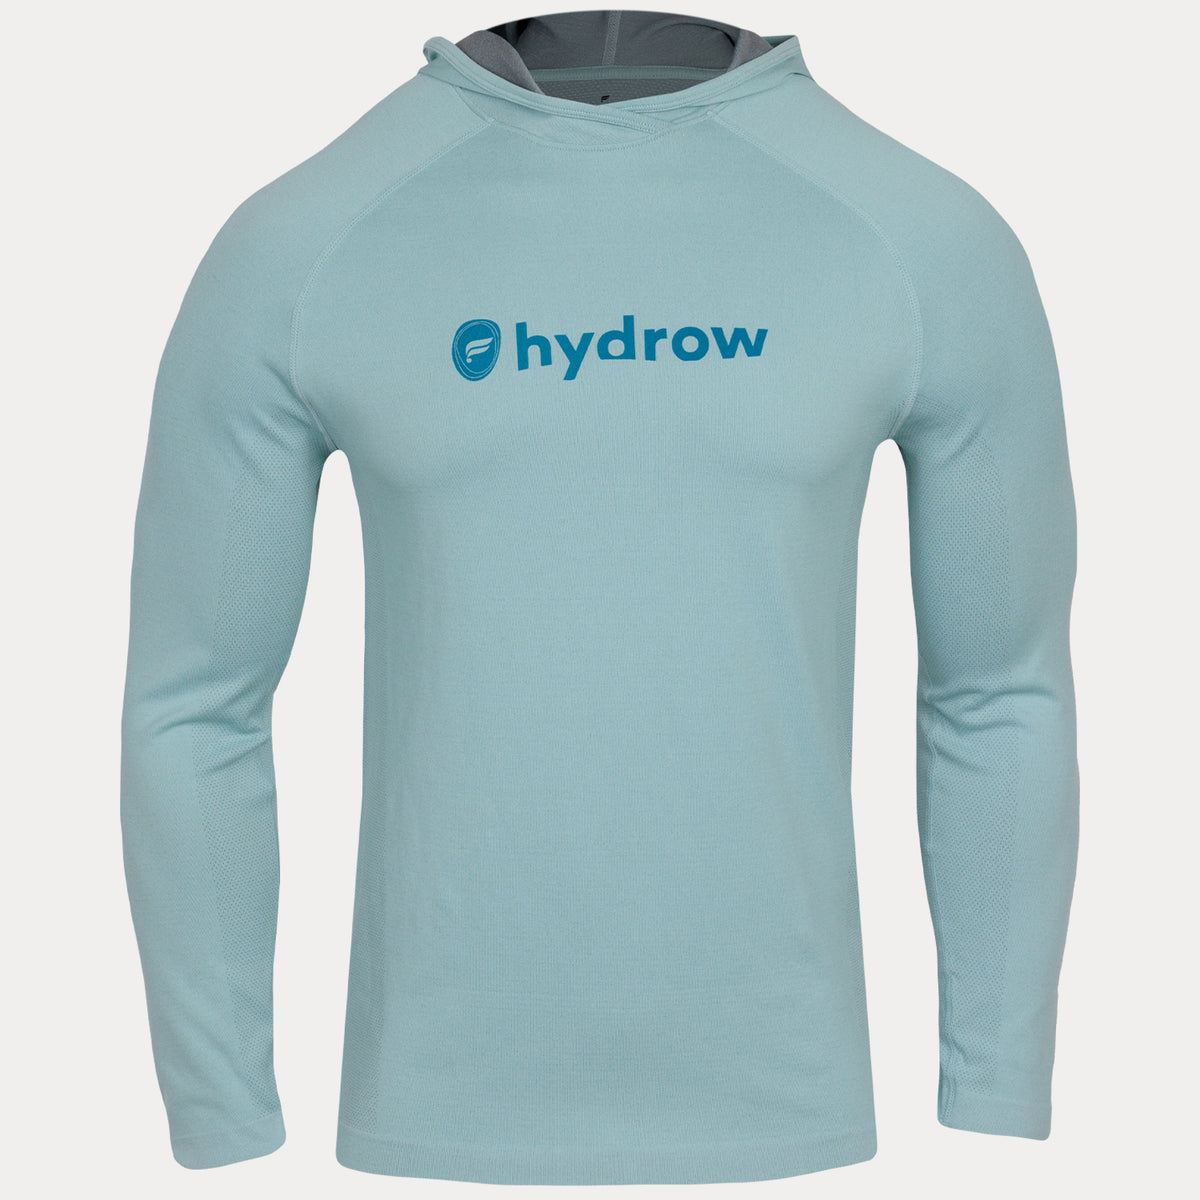 Light blue hoodie with dark blue Fabletics and Hydrow logo on front